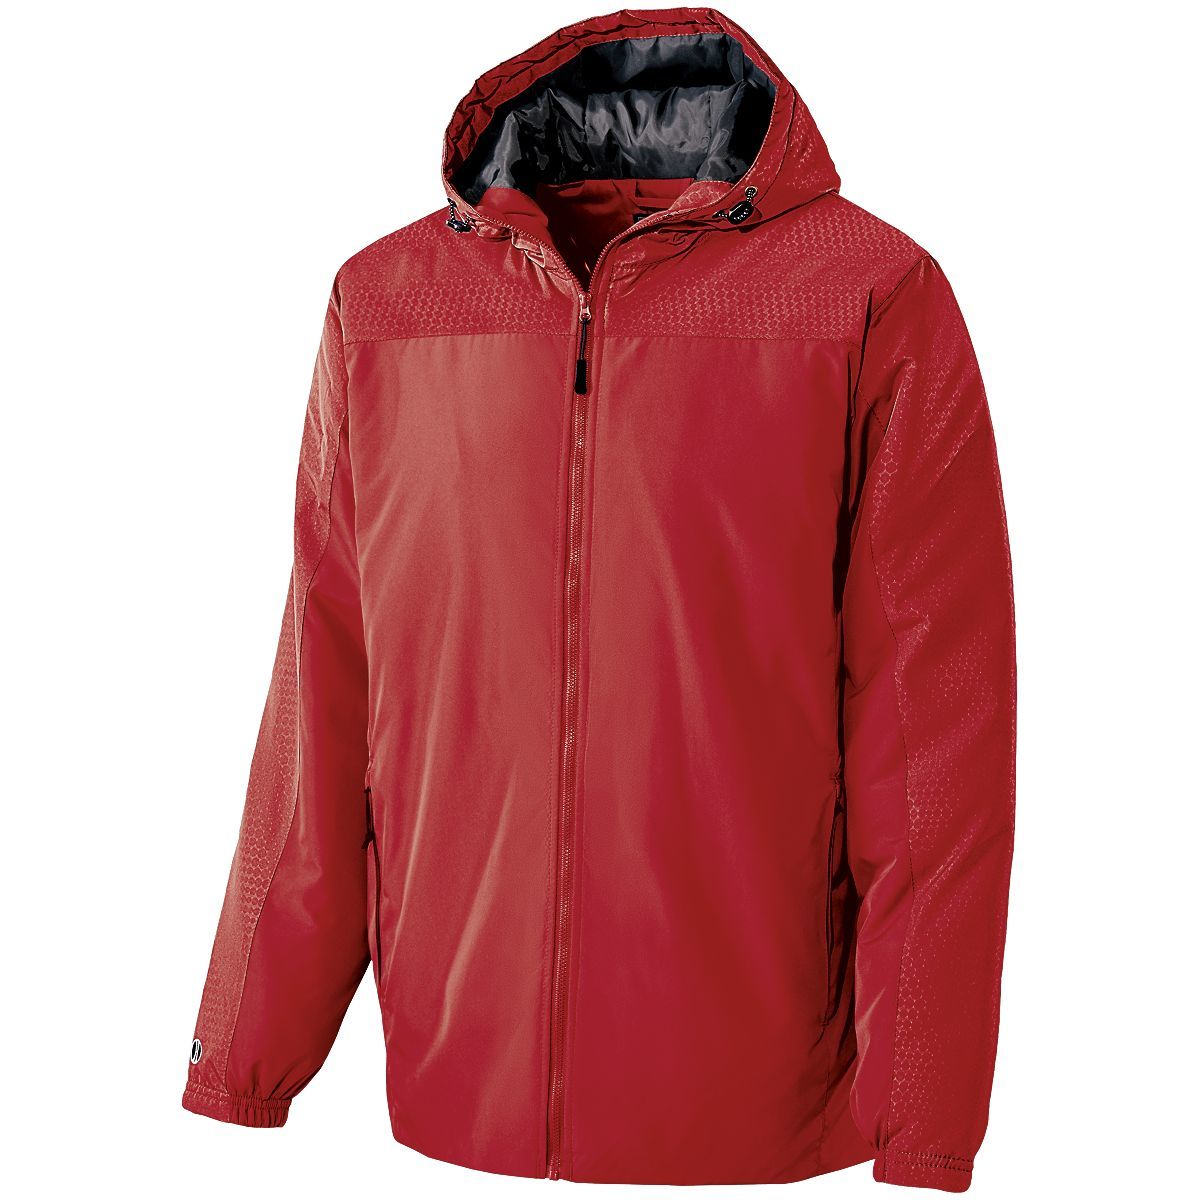 Holloway Youth Bionic Hooded Jacket in Scarlet/Carbon  -Part of the Youth, Youth-Jacket, Holloway, Outerwear product lines at KanaleyCreations.com